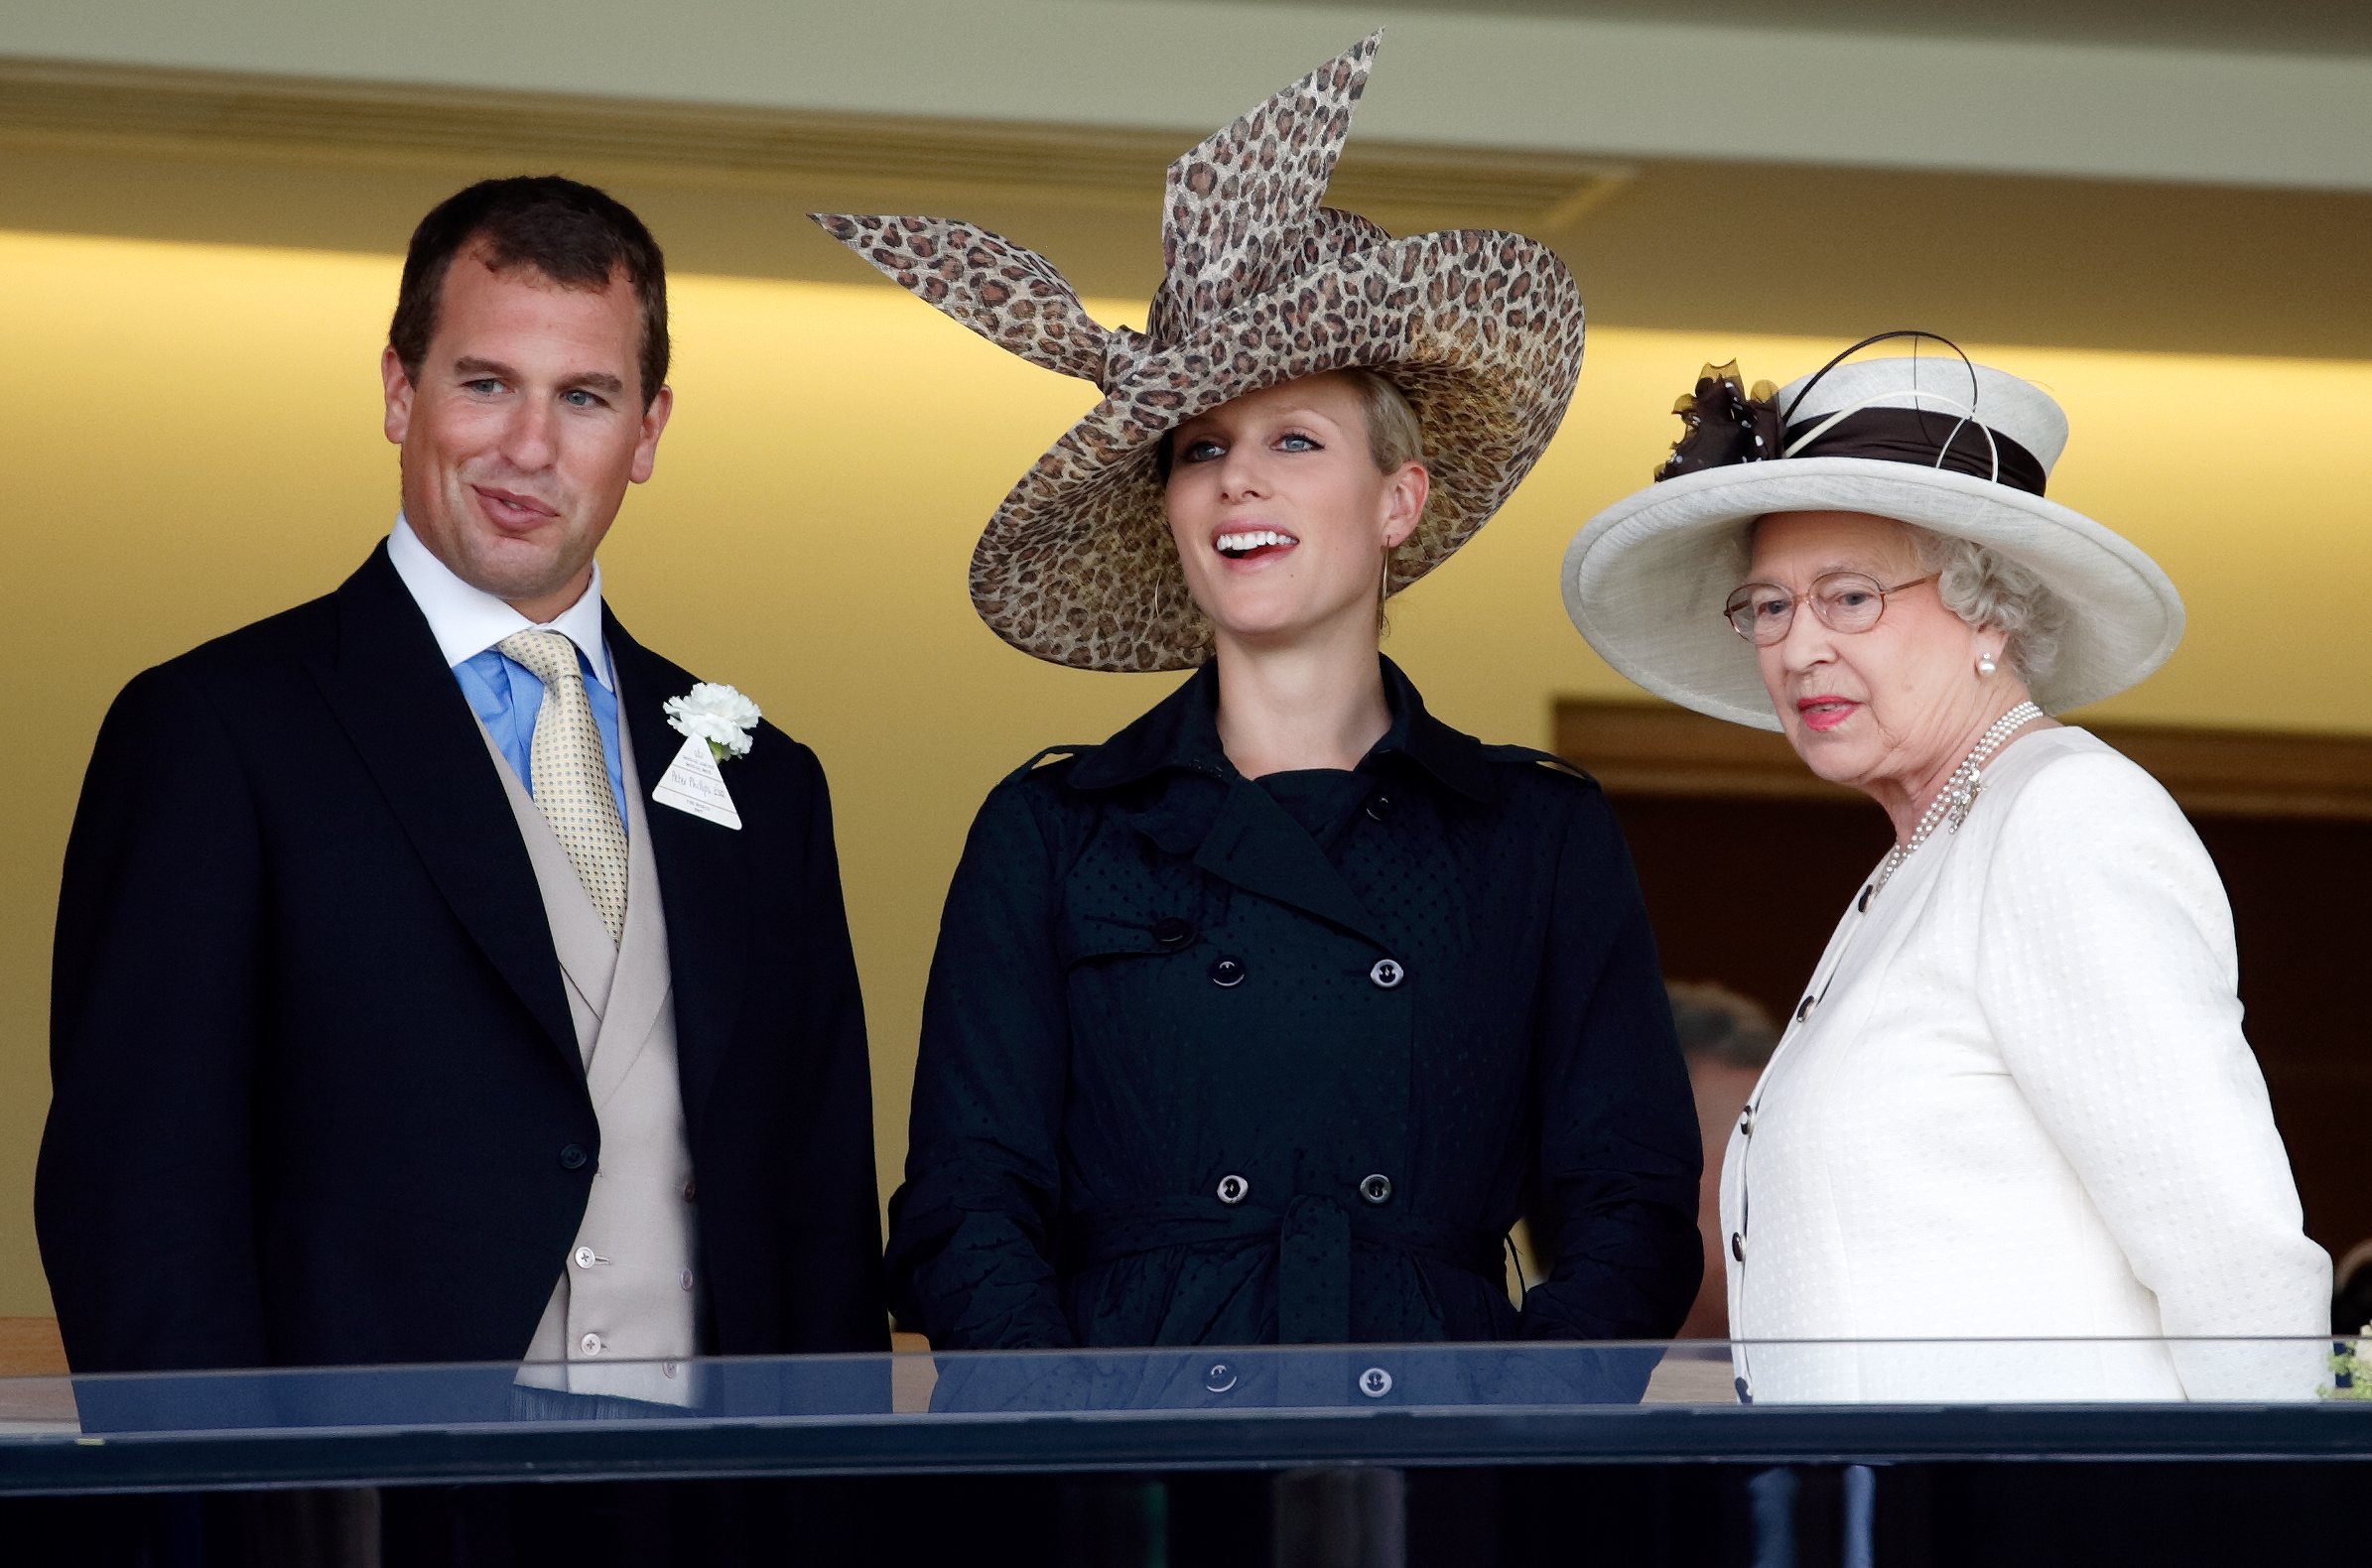 Peter Phillips, Zara Phillips and Queen Elizabeth II watch the racing from the Royal Box as they attend day 3 of Royal Ascot at Ascot Racecourse on June 21, 2007 in Ascot, England | Source: Getty Images